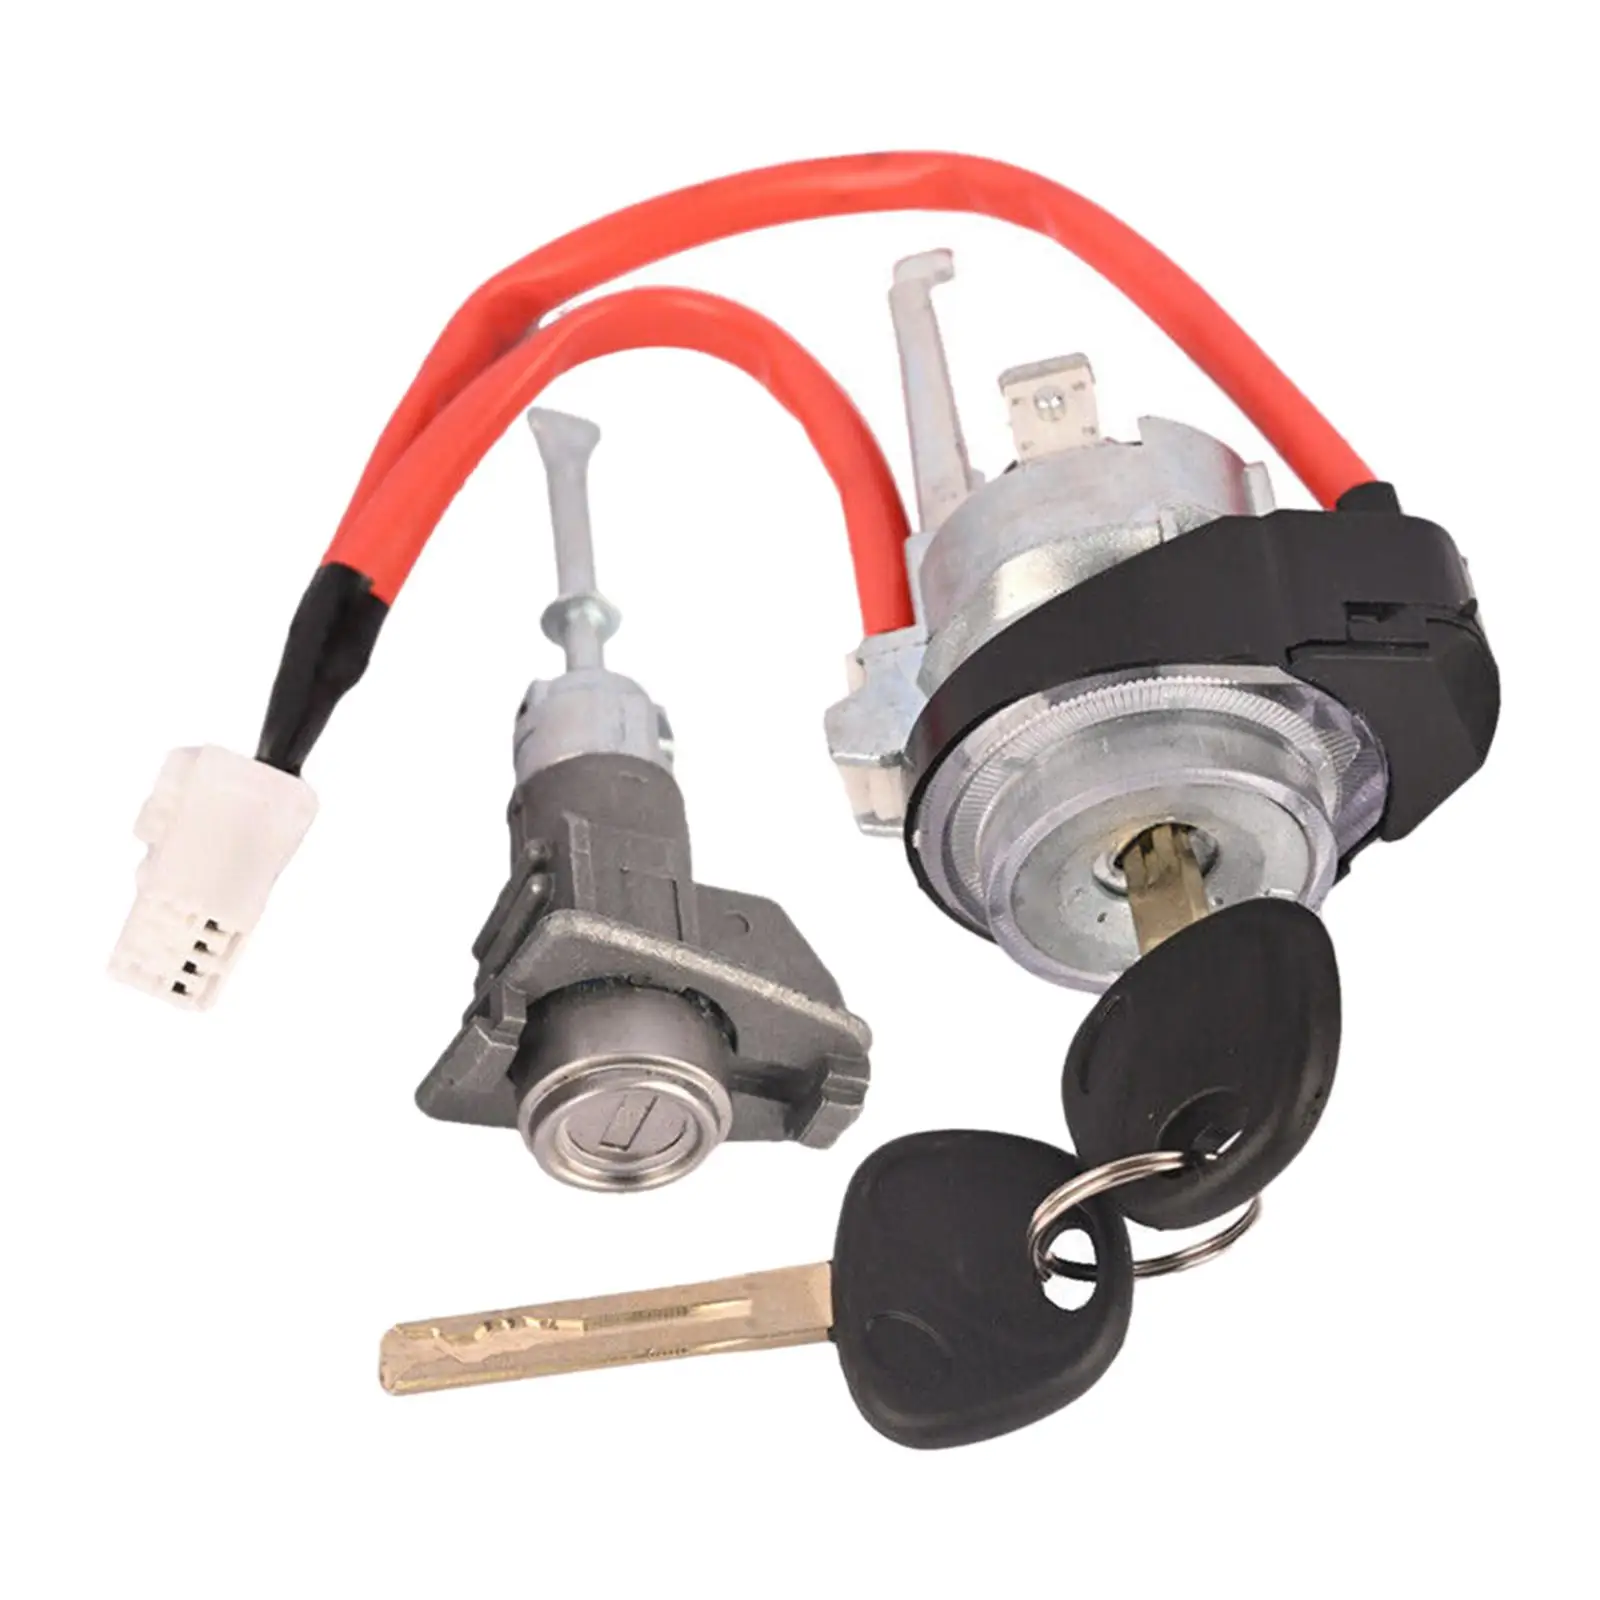 Full Door Lock Cylinder Ignition Lock Cylinder for Kia Sportage Easy to Install Professional Sturdy Repair Part